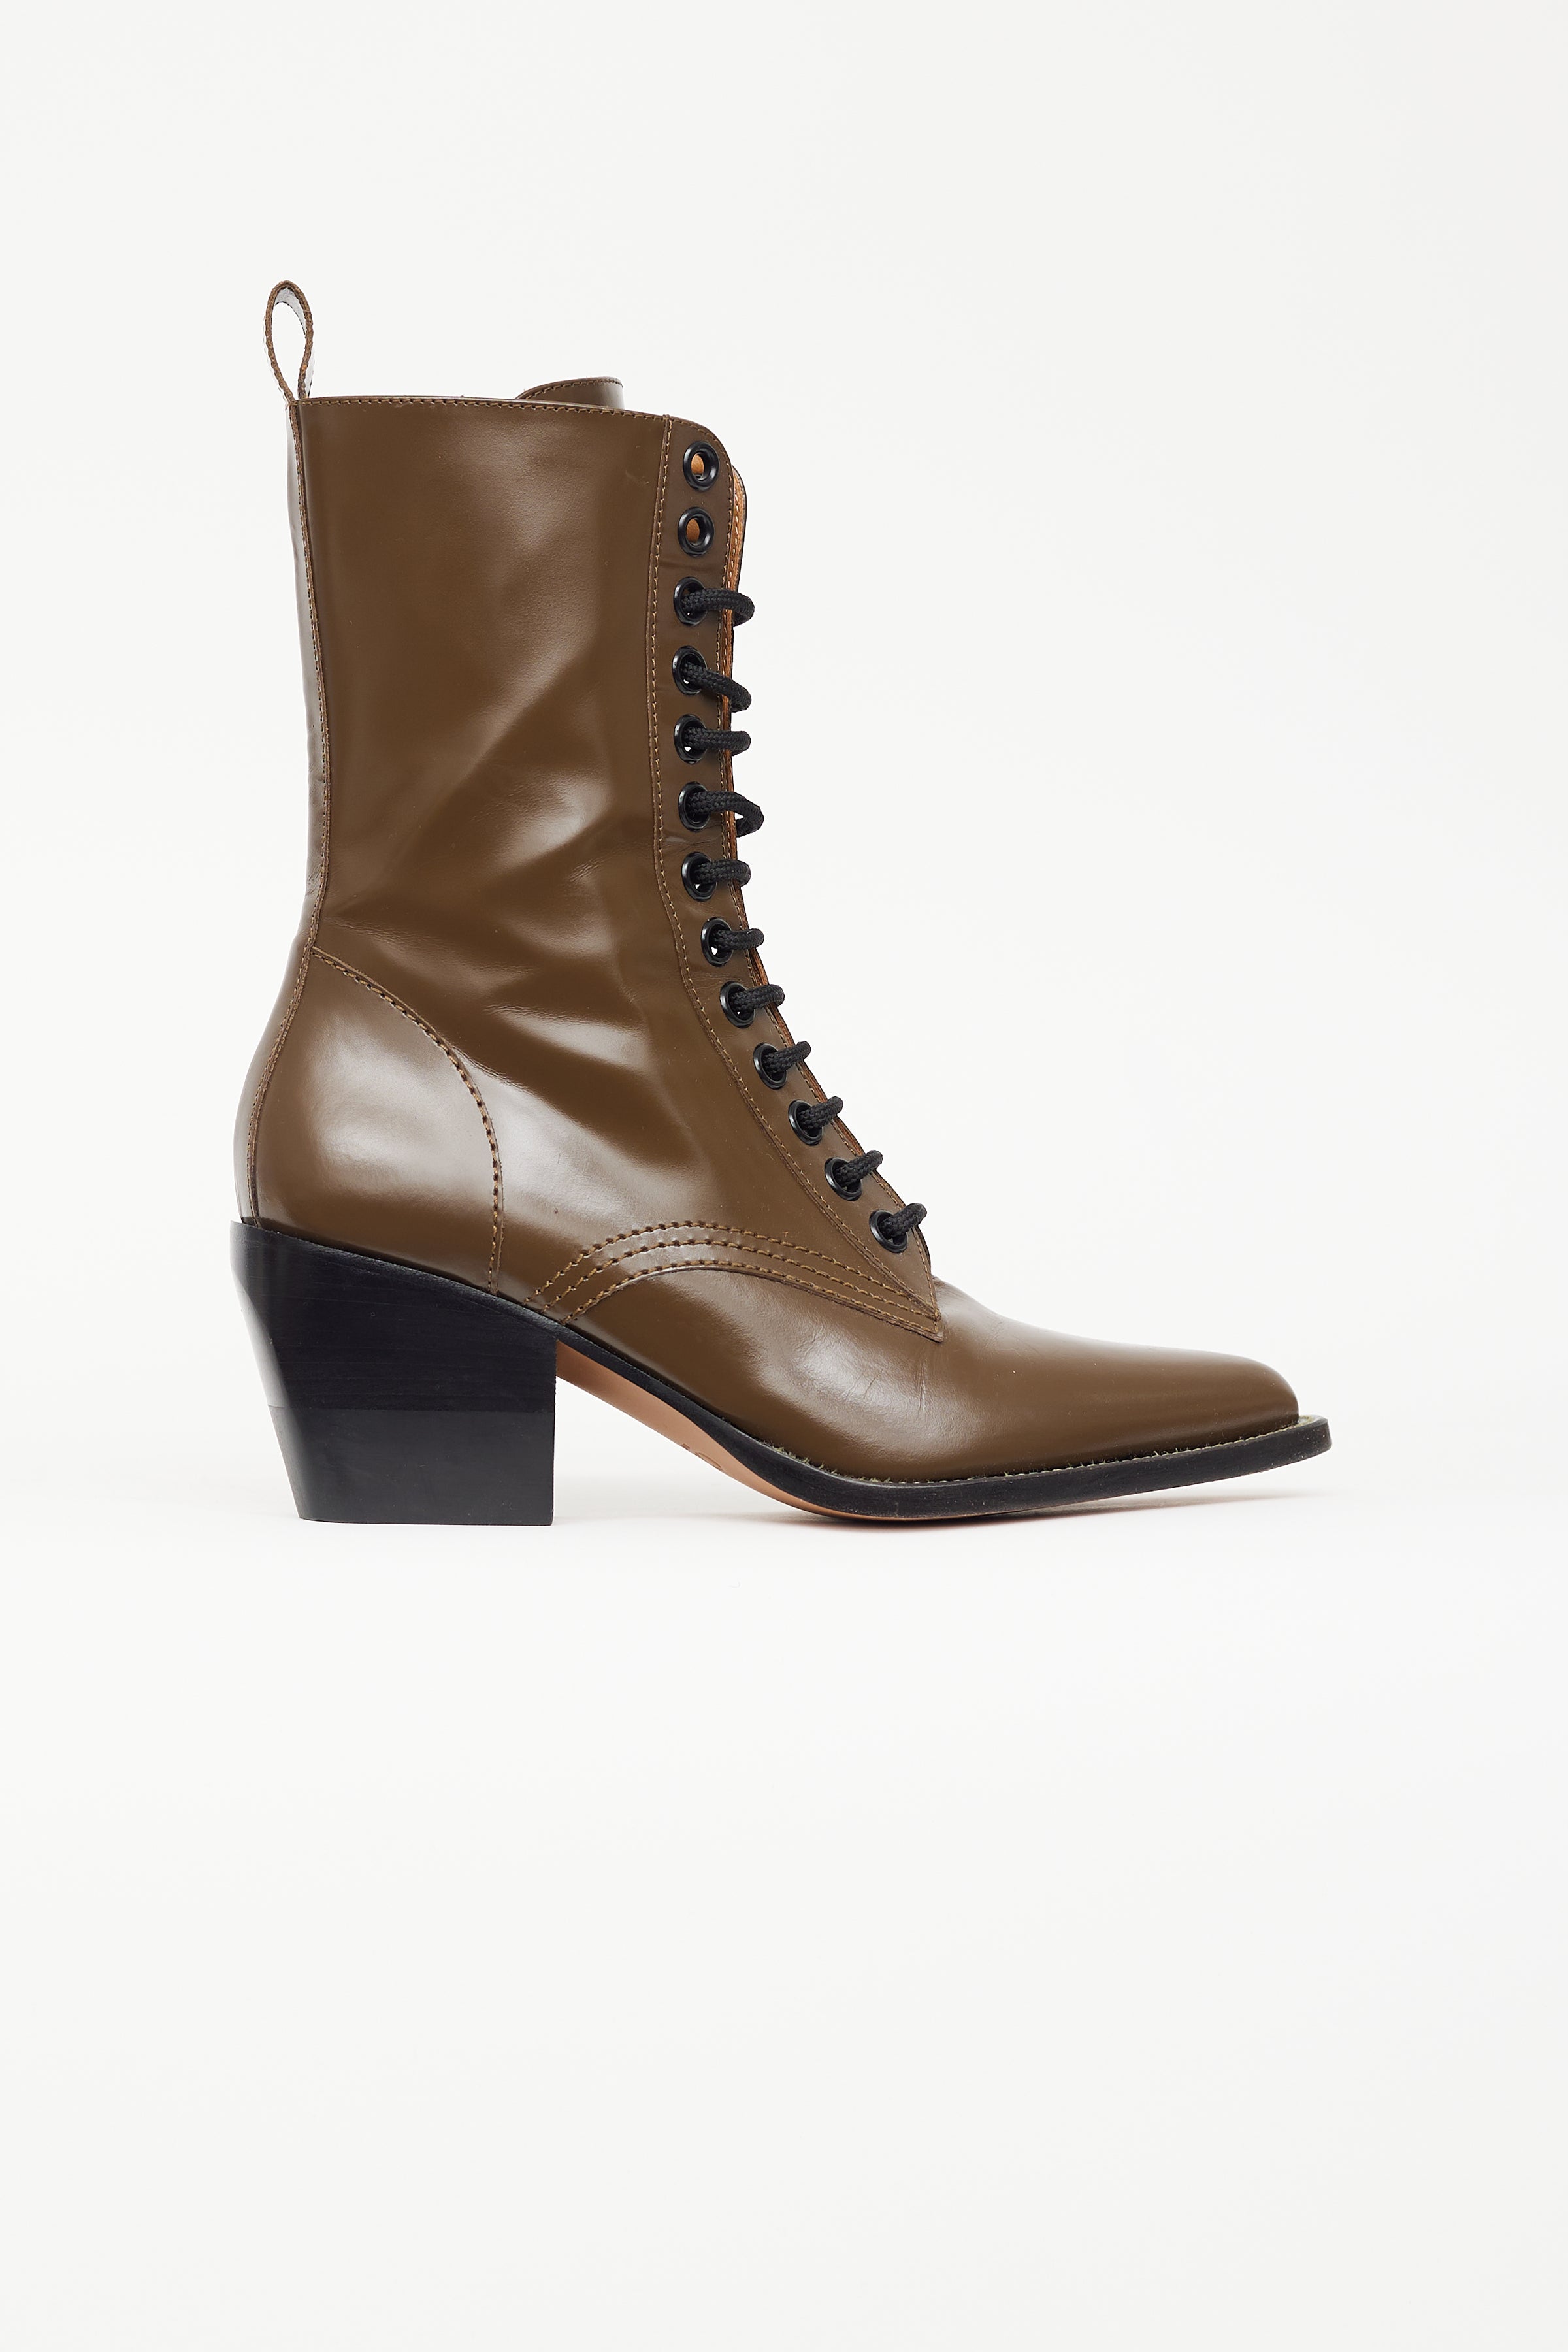 Chloé // Brown Lace Up Pointed Toe Boot – VSP Consignment